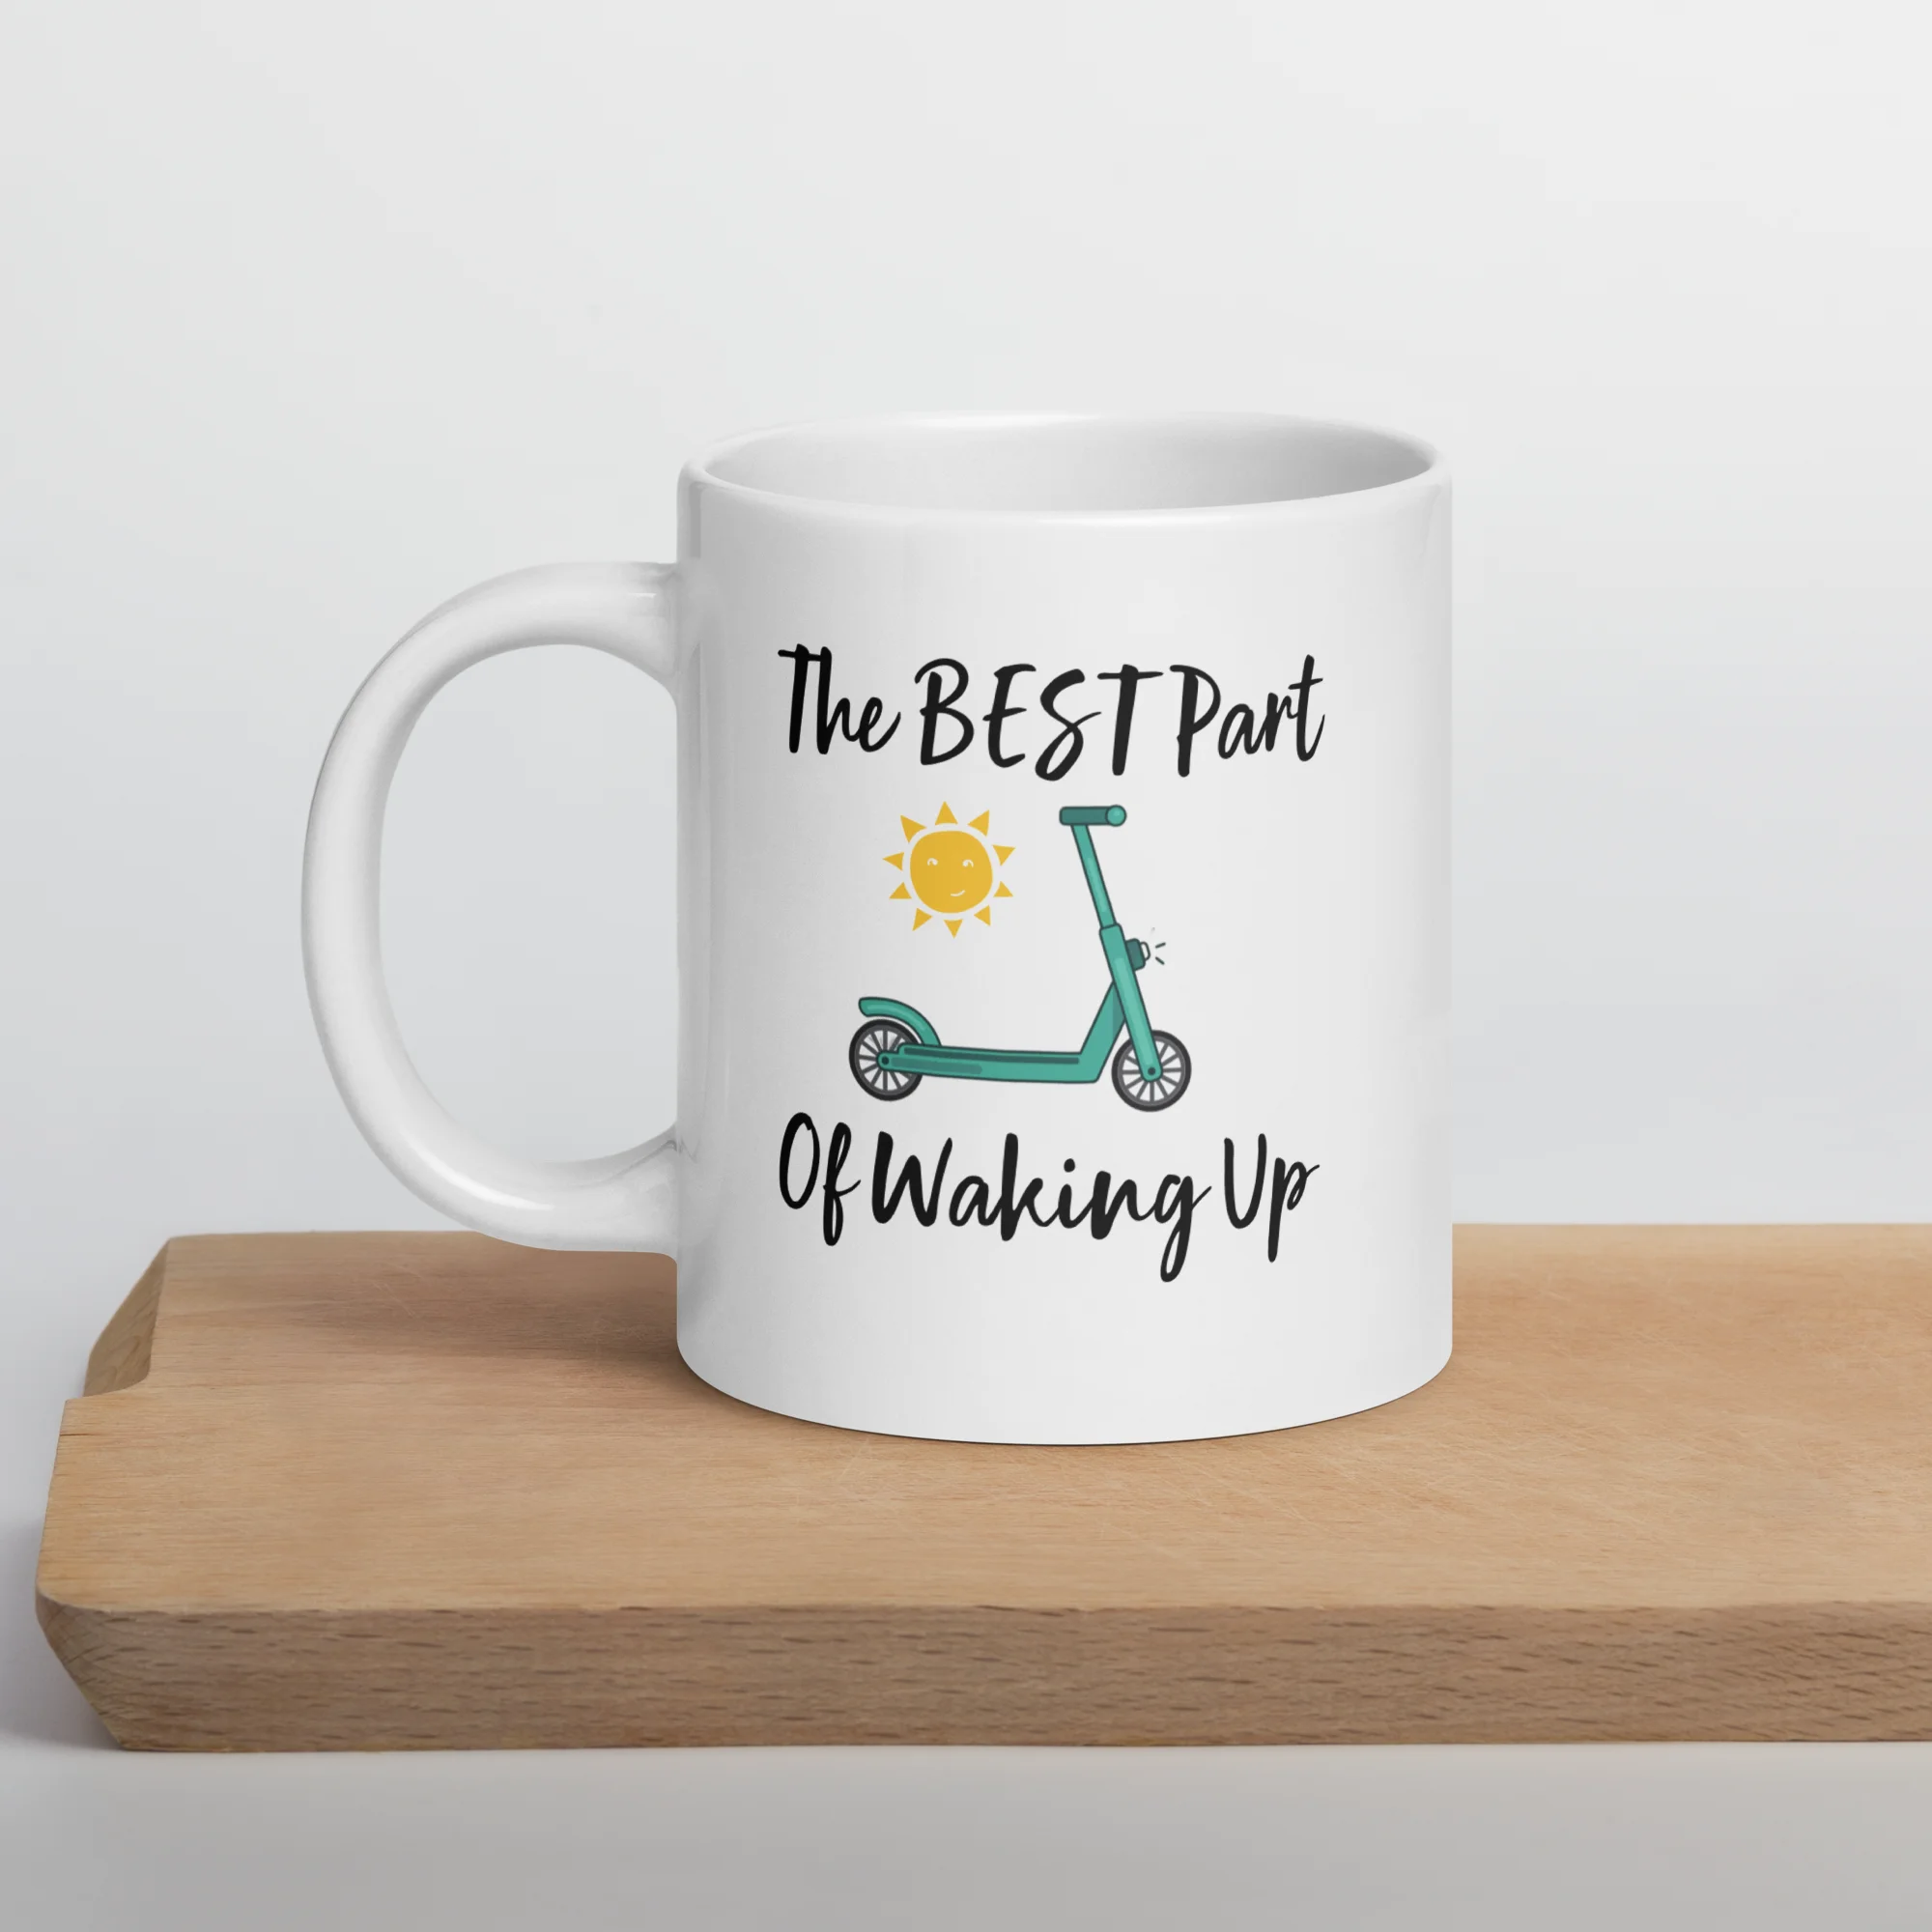 Funny Coffee Mug: E-Scooters - The Best Part Of Waking Up! (20oz)